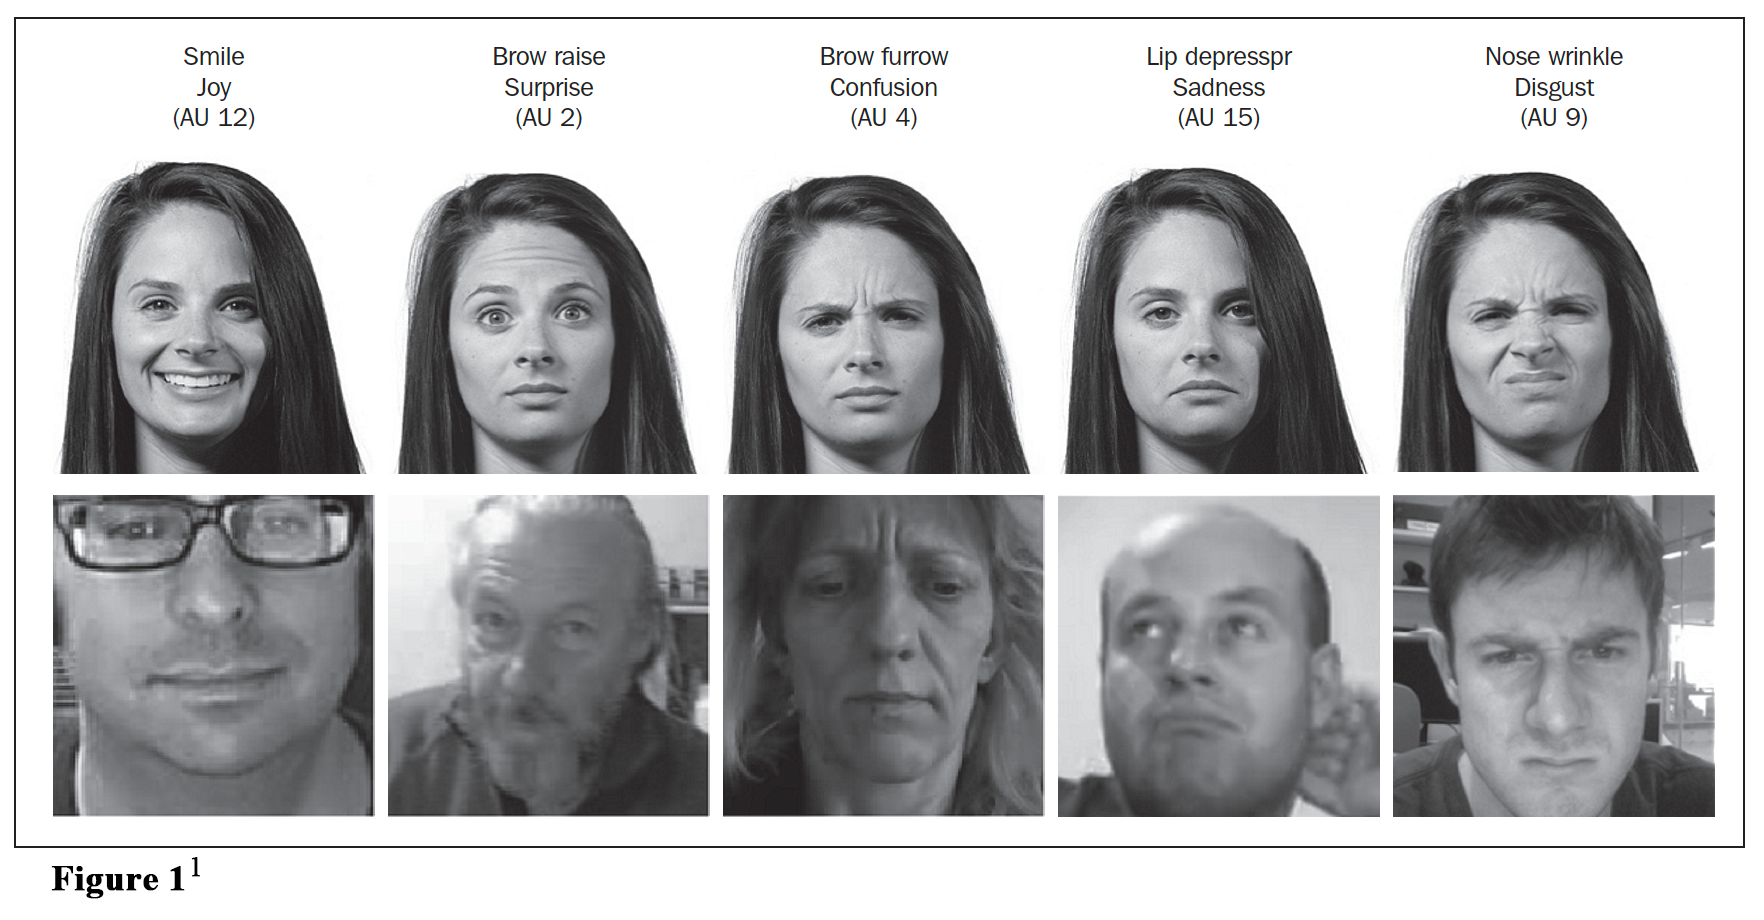 Graphic indicating different types of facial expression of smile, brow raise, brow furrow, lip depressor and nose wrinkle